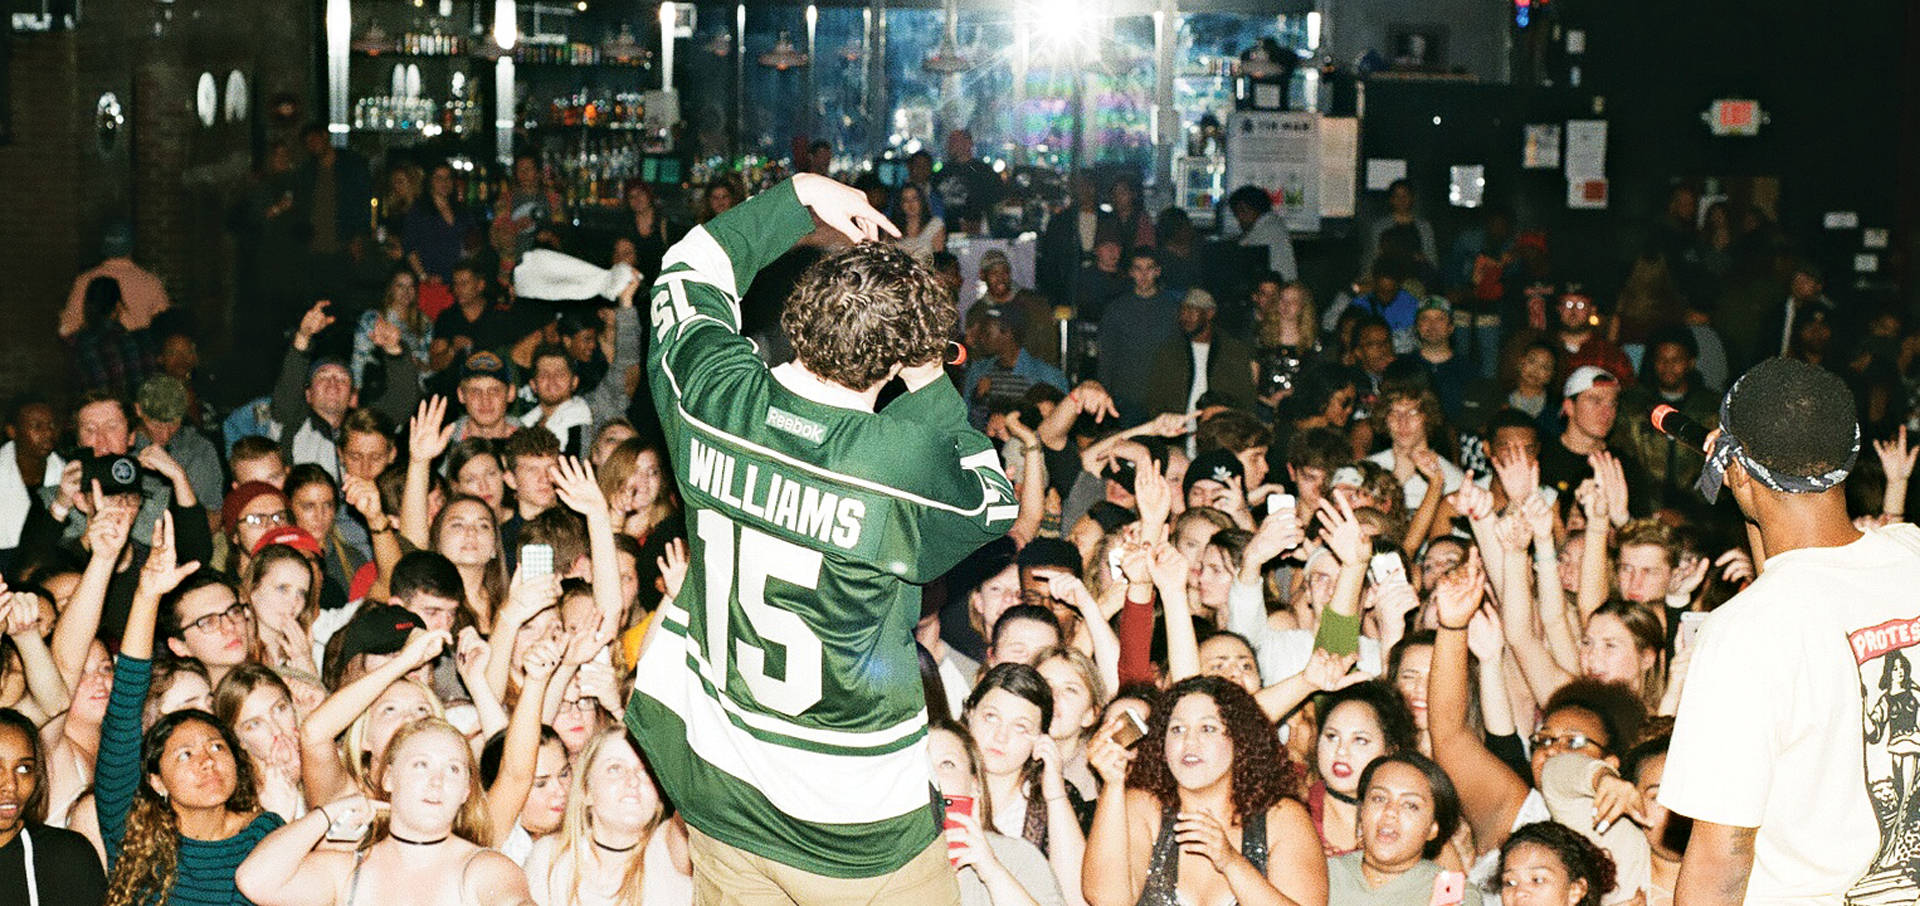 Jack Harlow With Crowd Background